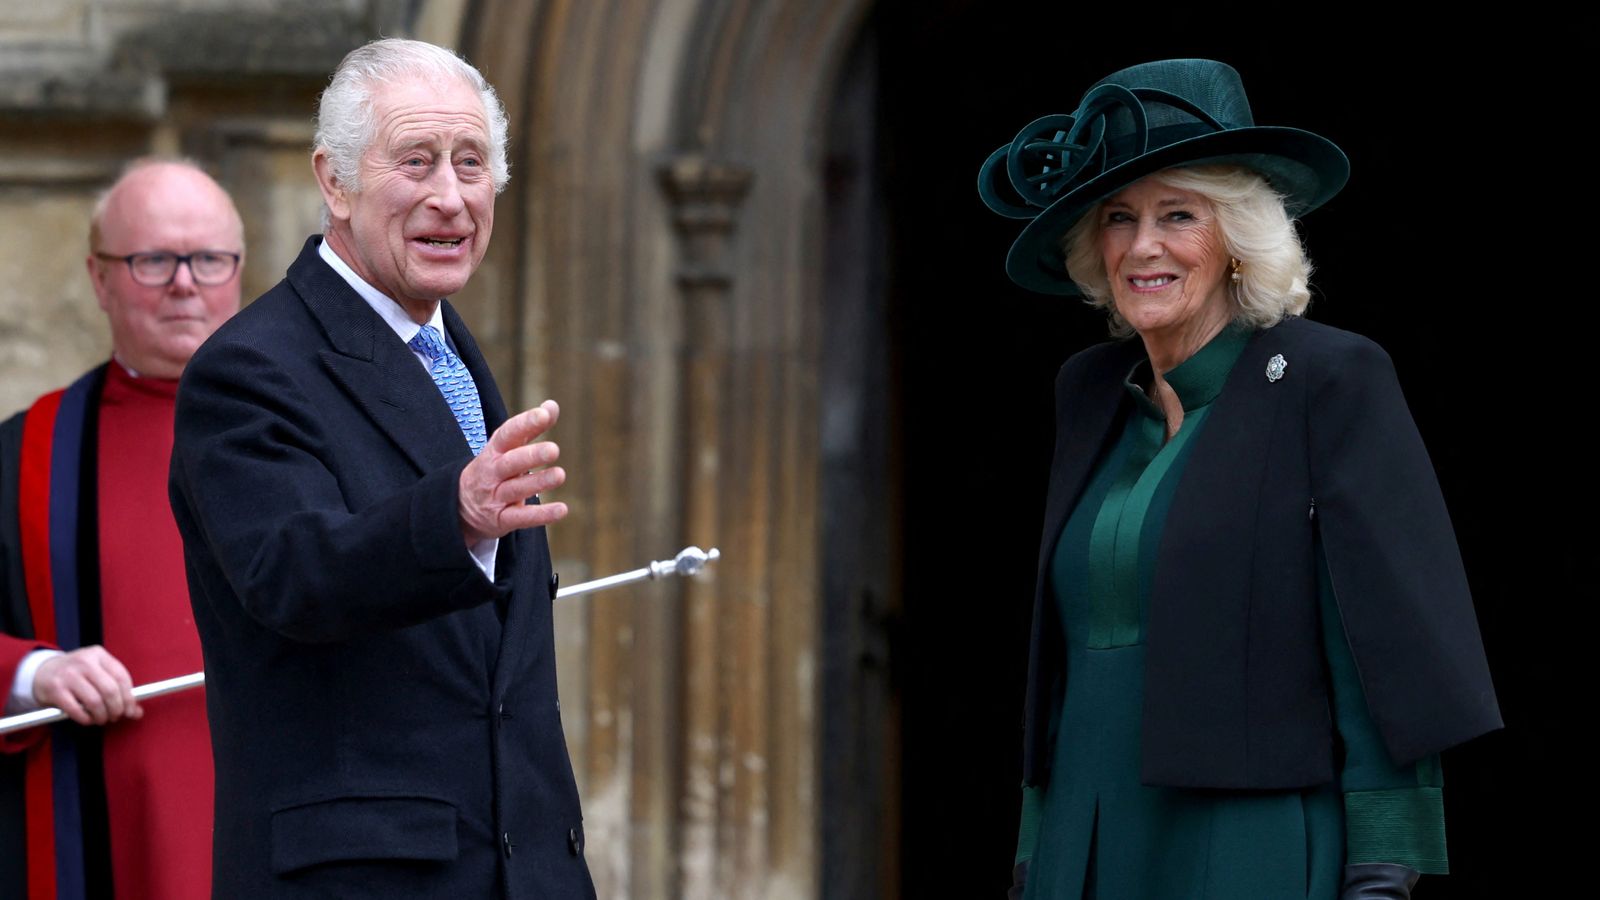 King attends Easter Sunday service but Prince and Princess of Wales